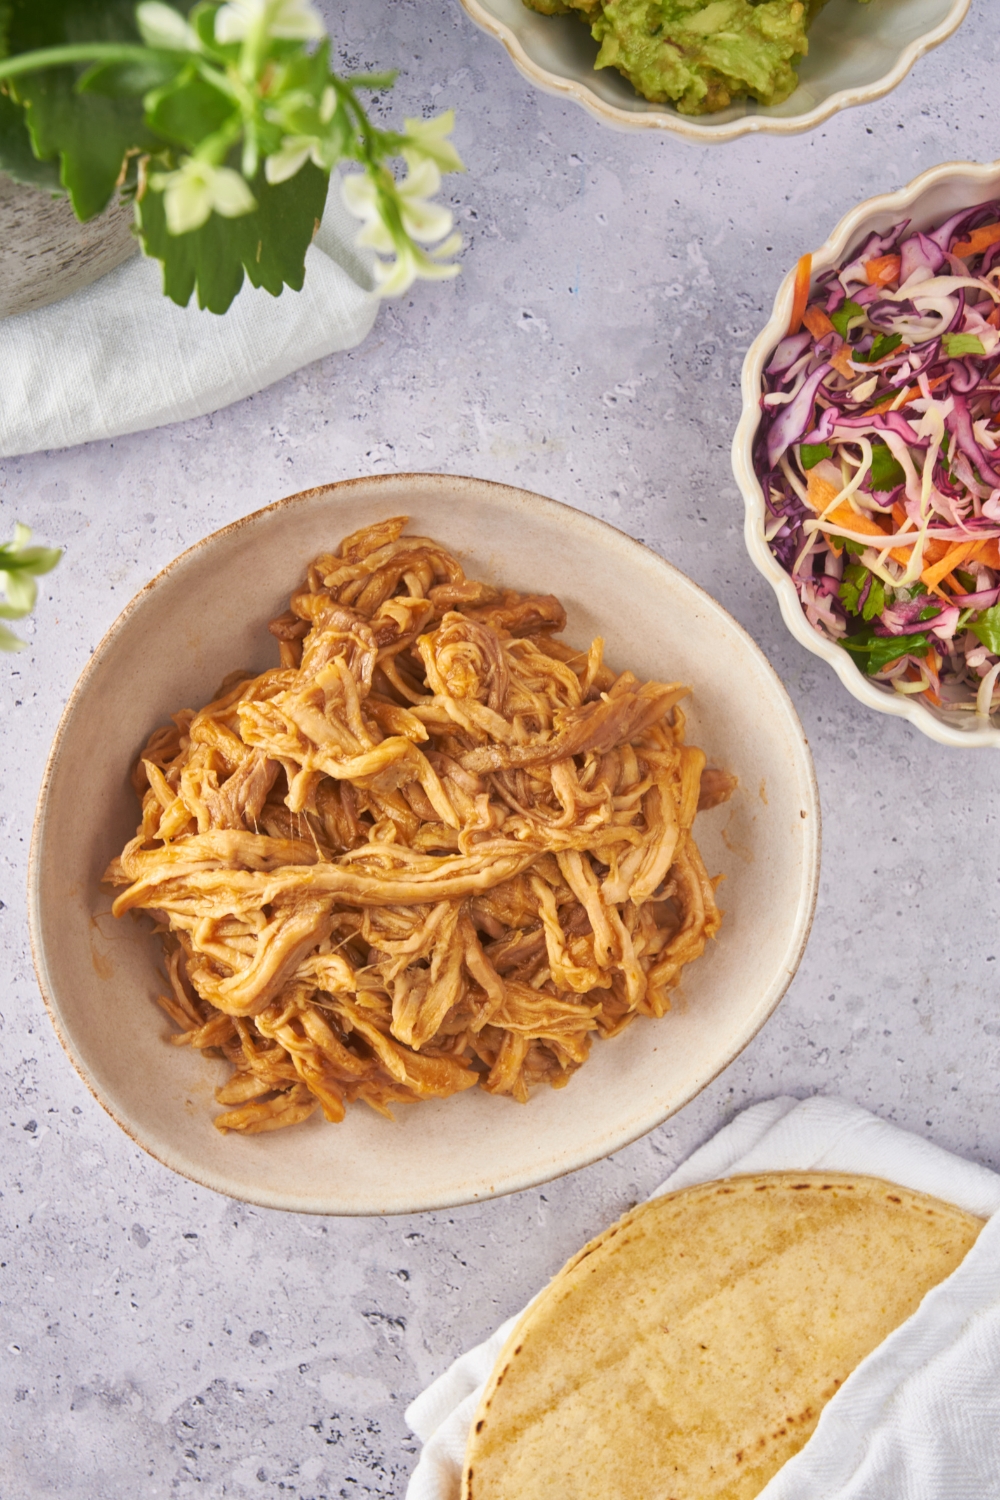 A bowl of BBQ pulled pork next to a pile of tortillas and a bowl of slaw.